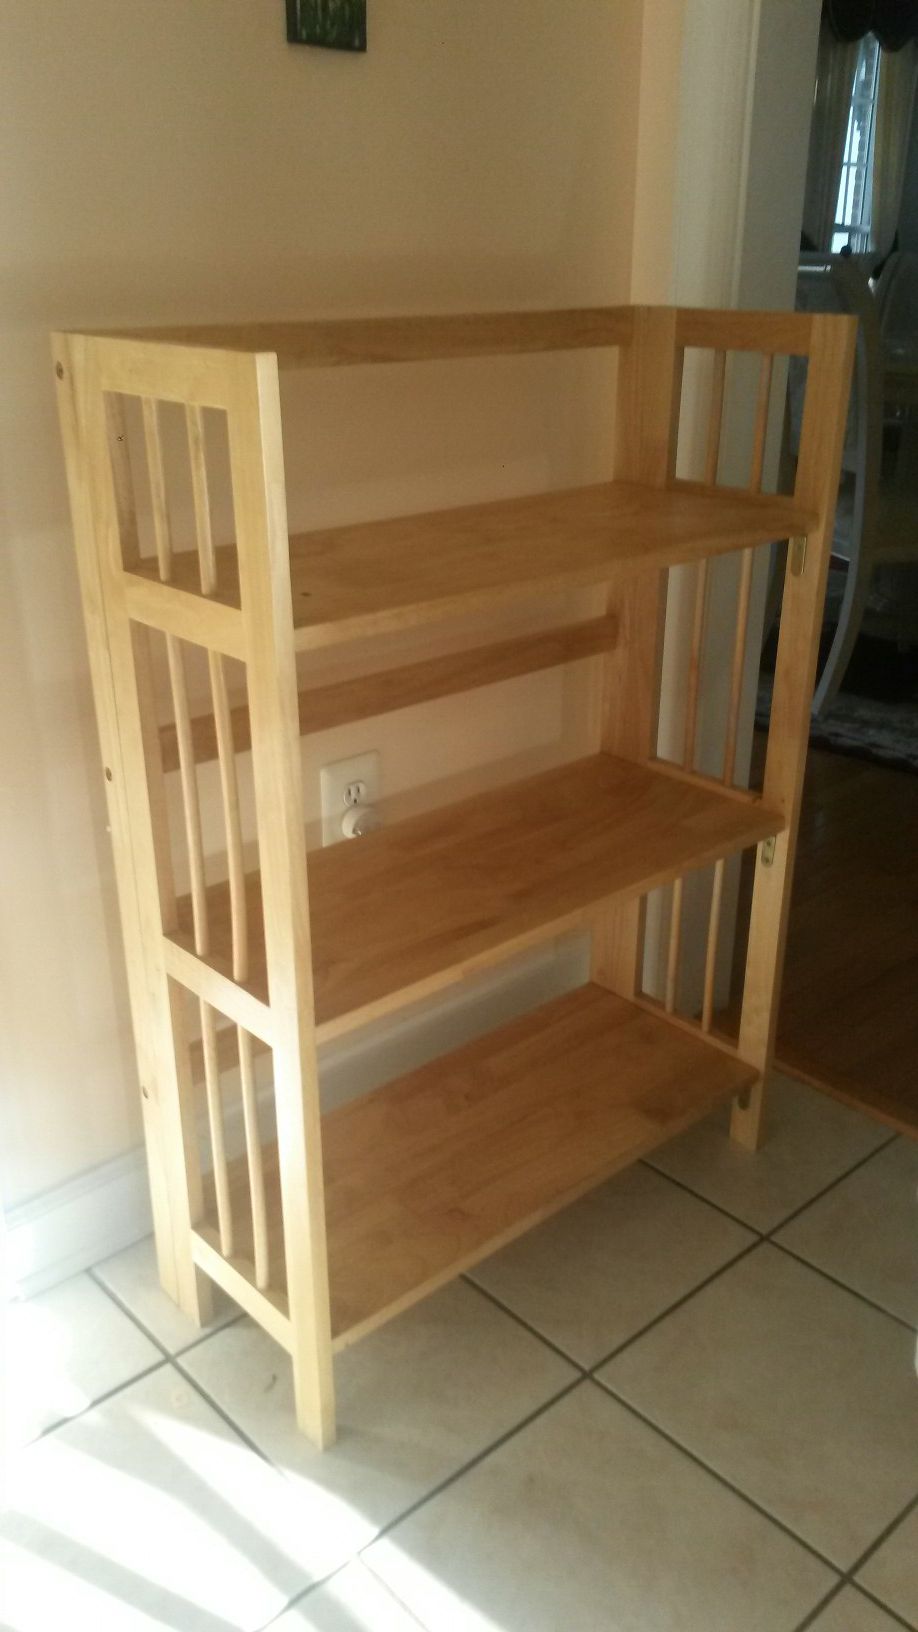 Beautiful solid maple wood shelves